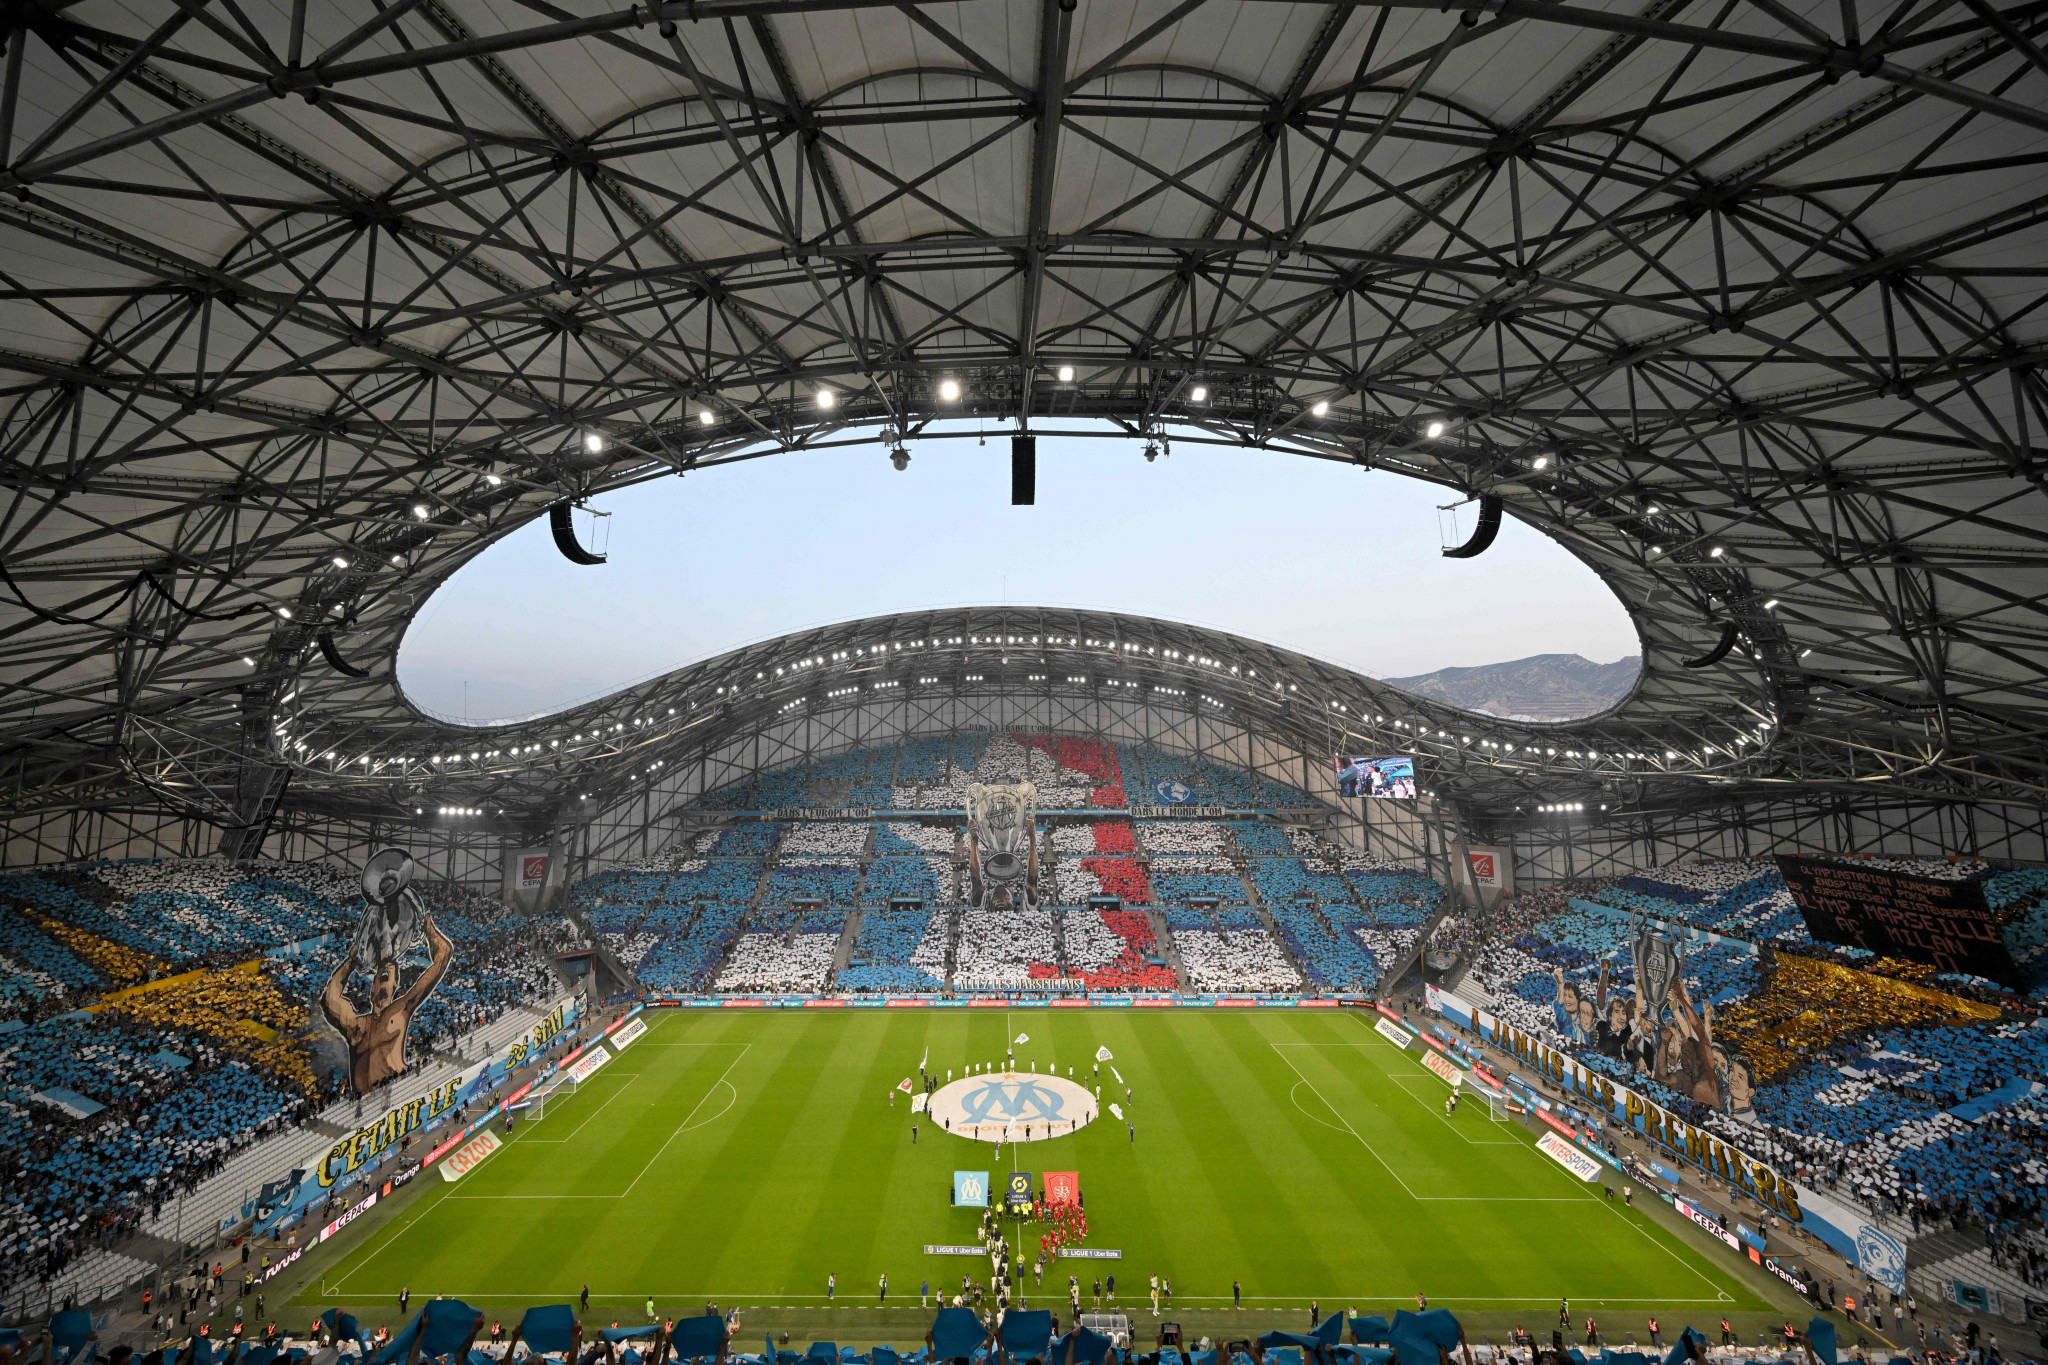 Marseille told Stade Vélodrome roof does not  need to display "Paris 2024" when hosts football